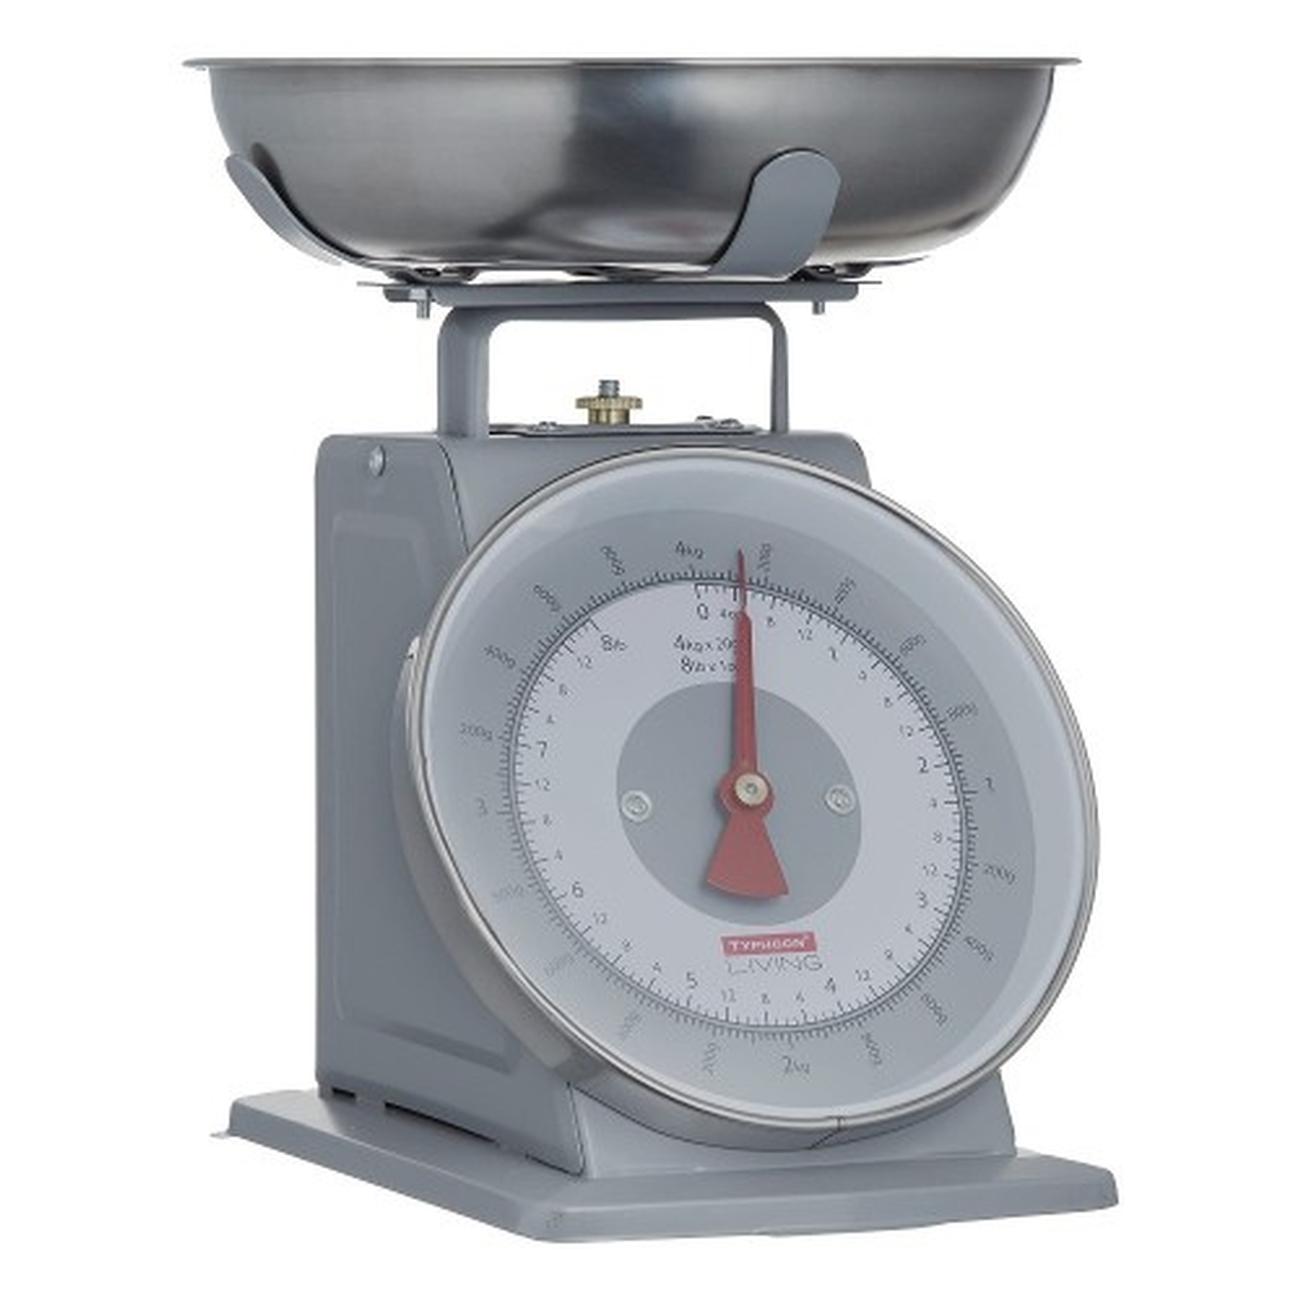 https://www.thekitchenwhisk.ie/contentfiles/productImages/Large/Living-Mechanical-Kitchen-Scales.jpg